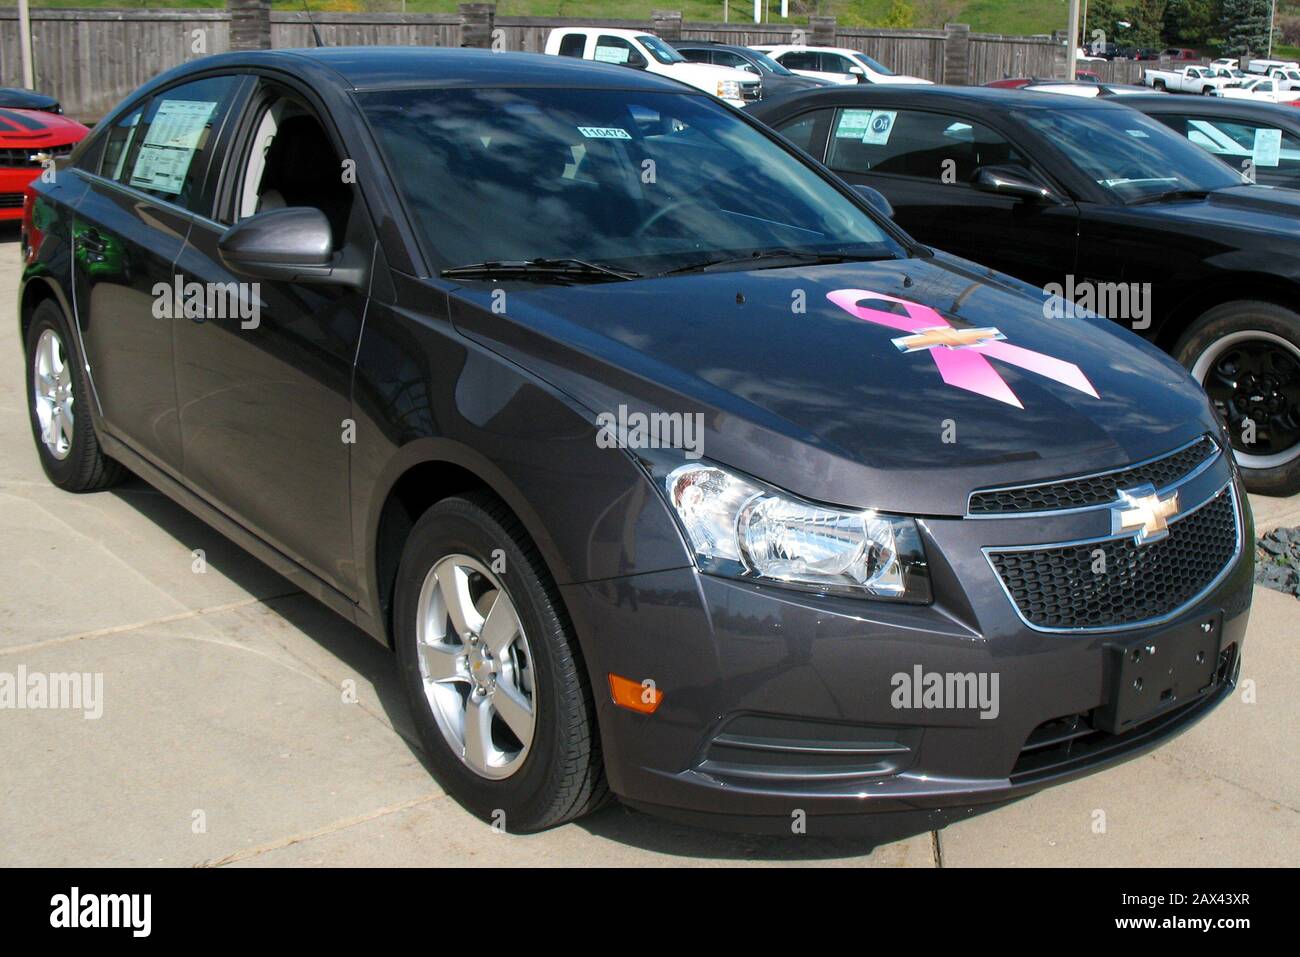 English: 2011 Chevrolet Cruze 2LT, photographed at a ACS fundraising event  in Minneapolis, Minnesota, United States.; 9 October 2010 (taken); 9  October 2010 (original upload date); Transferred from en.wikipedia to  Commons.; The